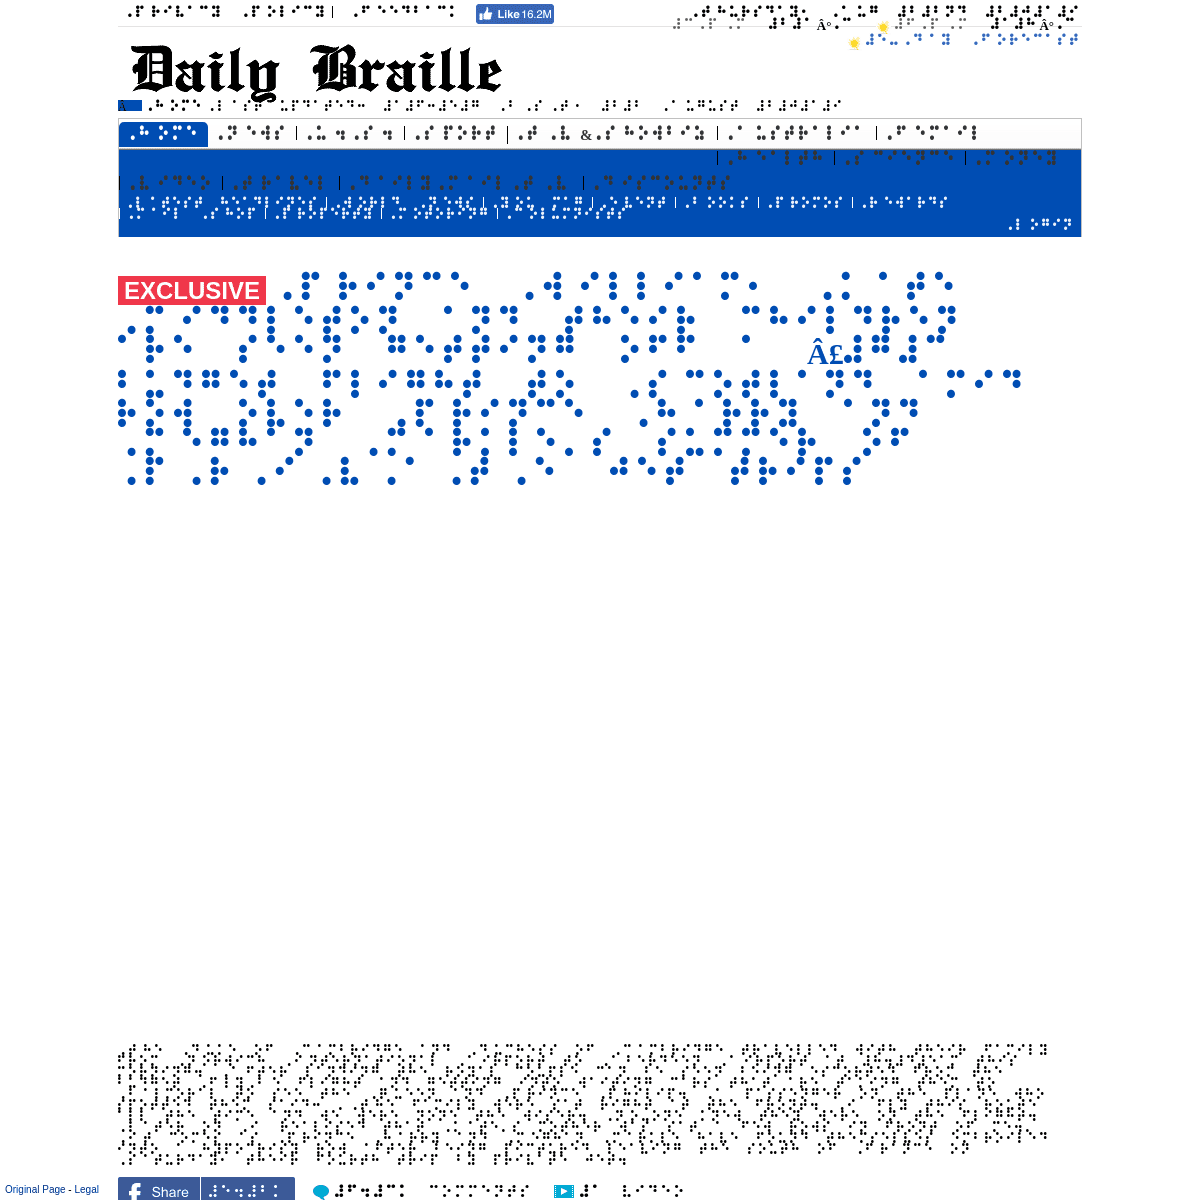 UK Home | Daily Mail Online - THE DAILY BRAILLE